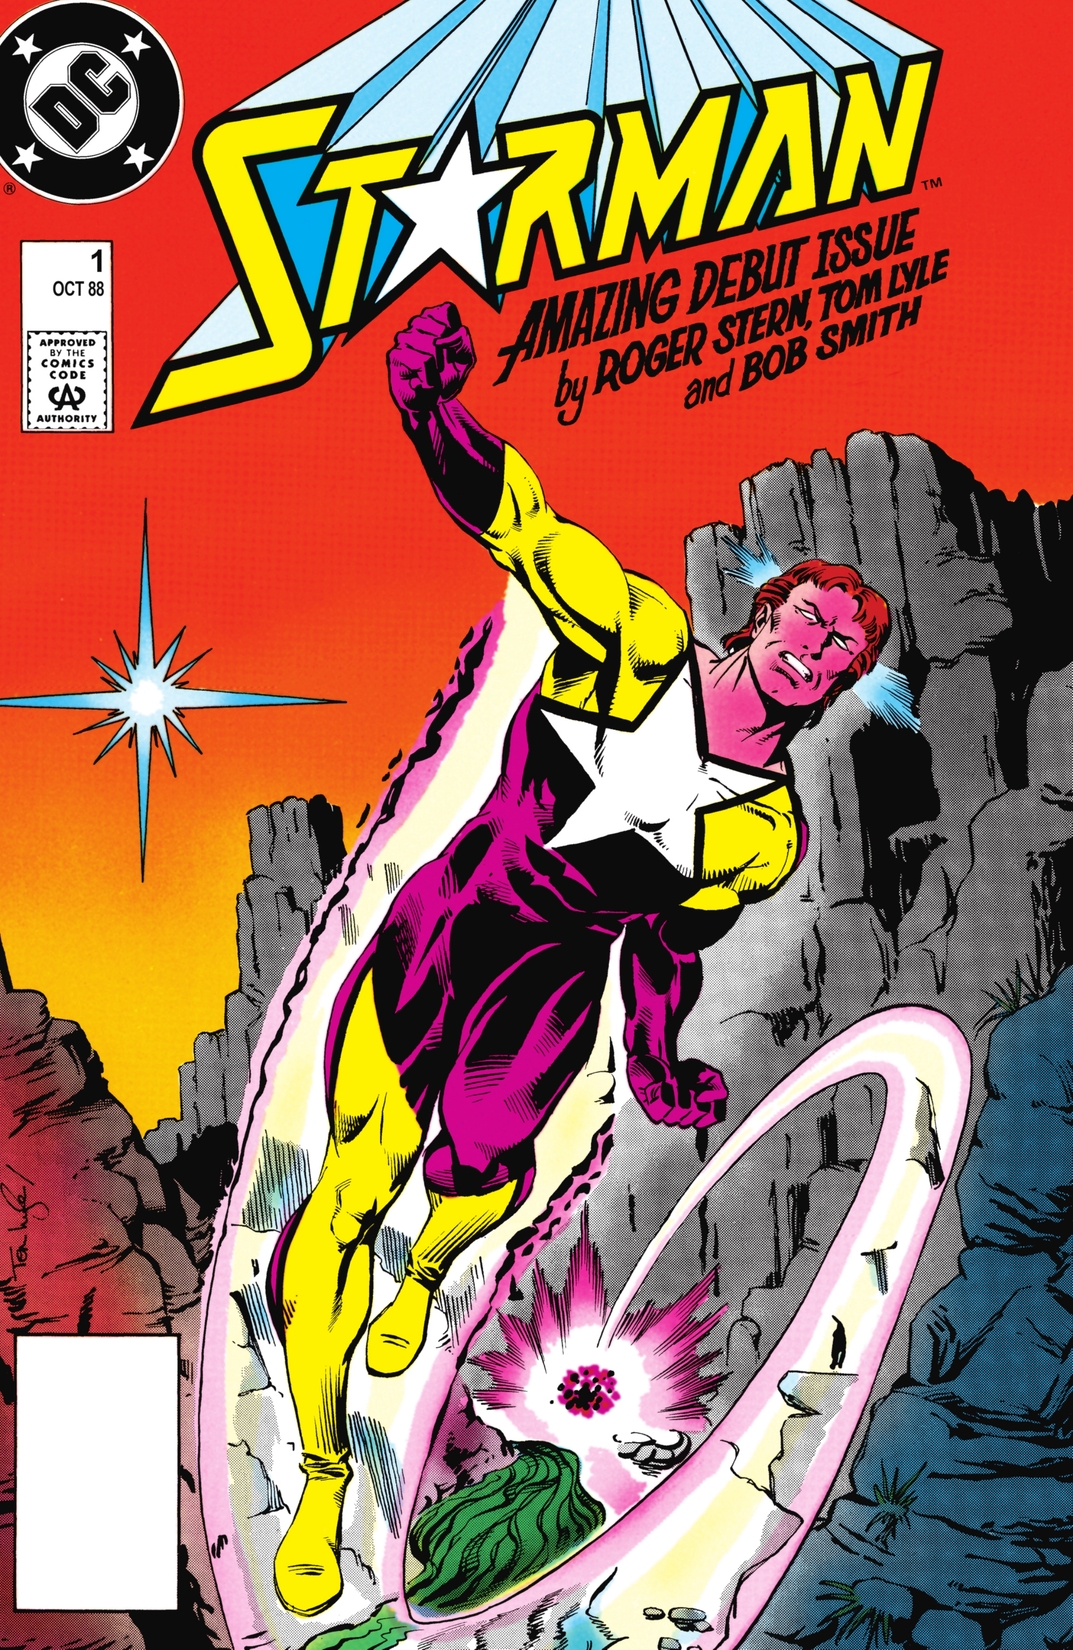 Starman (1988-) #1 preview images